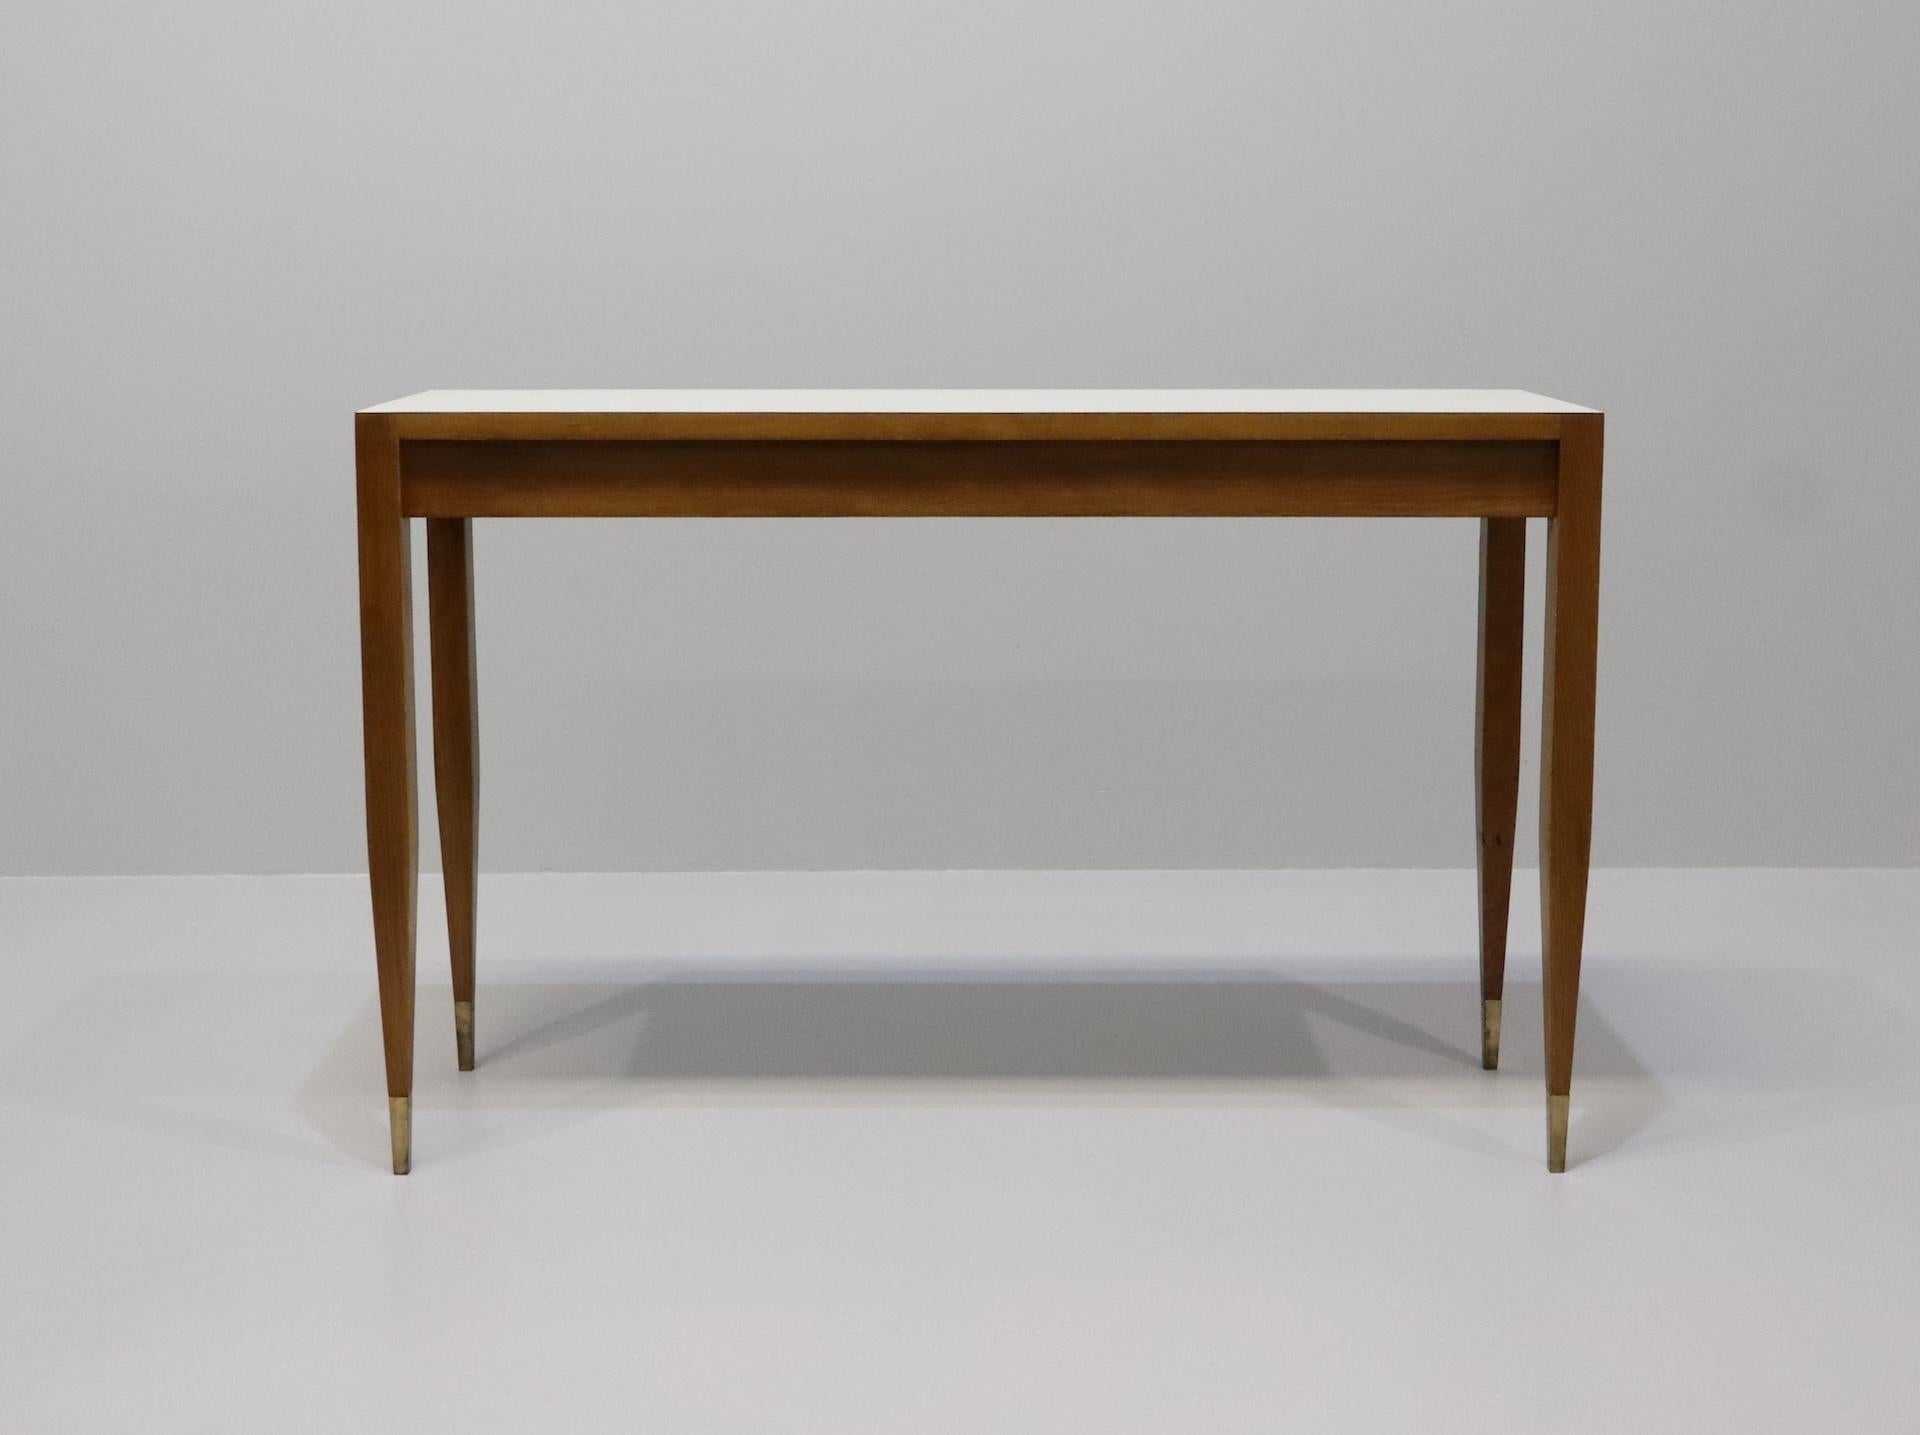 Pair Gio Ponti Consoles for Giordano Chiesa Italy, 1964 For Sale 3